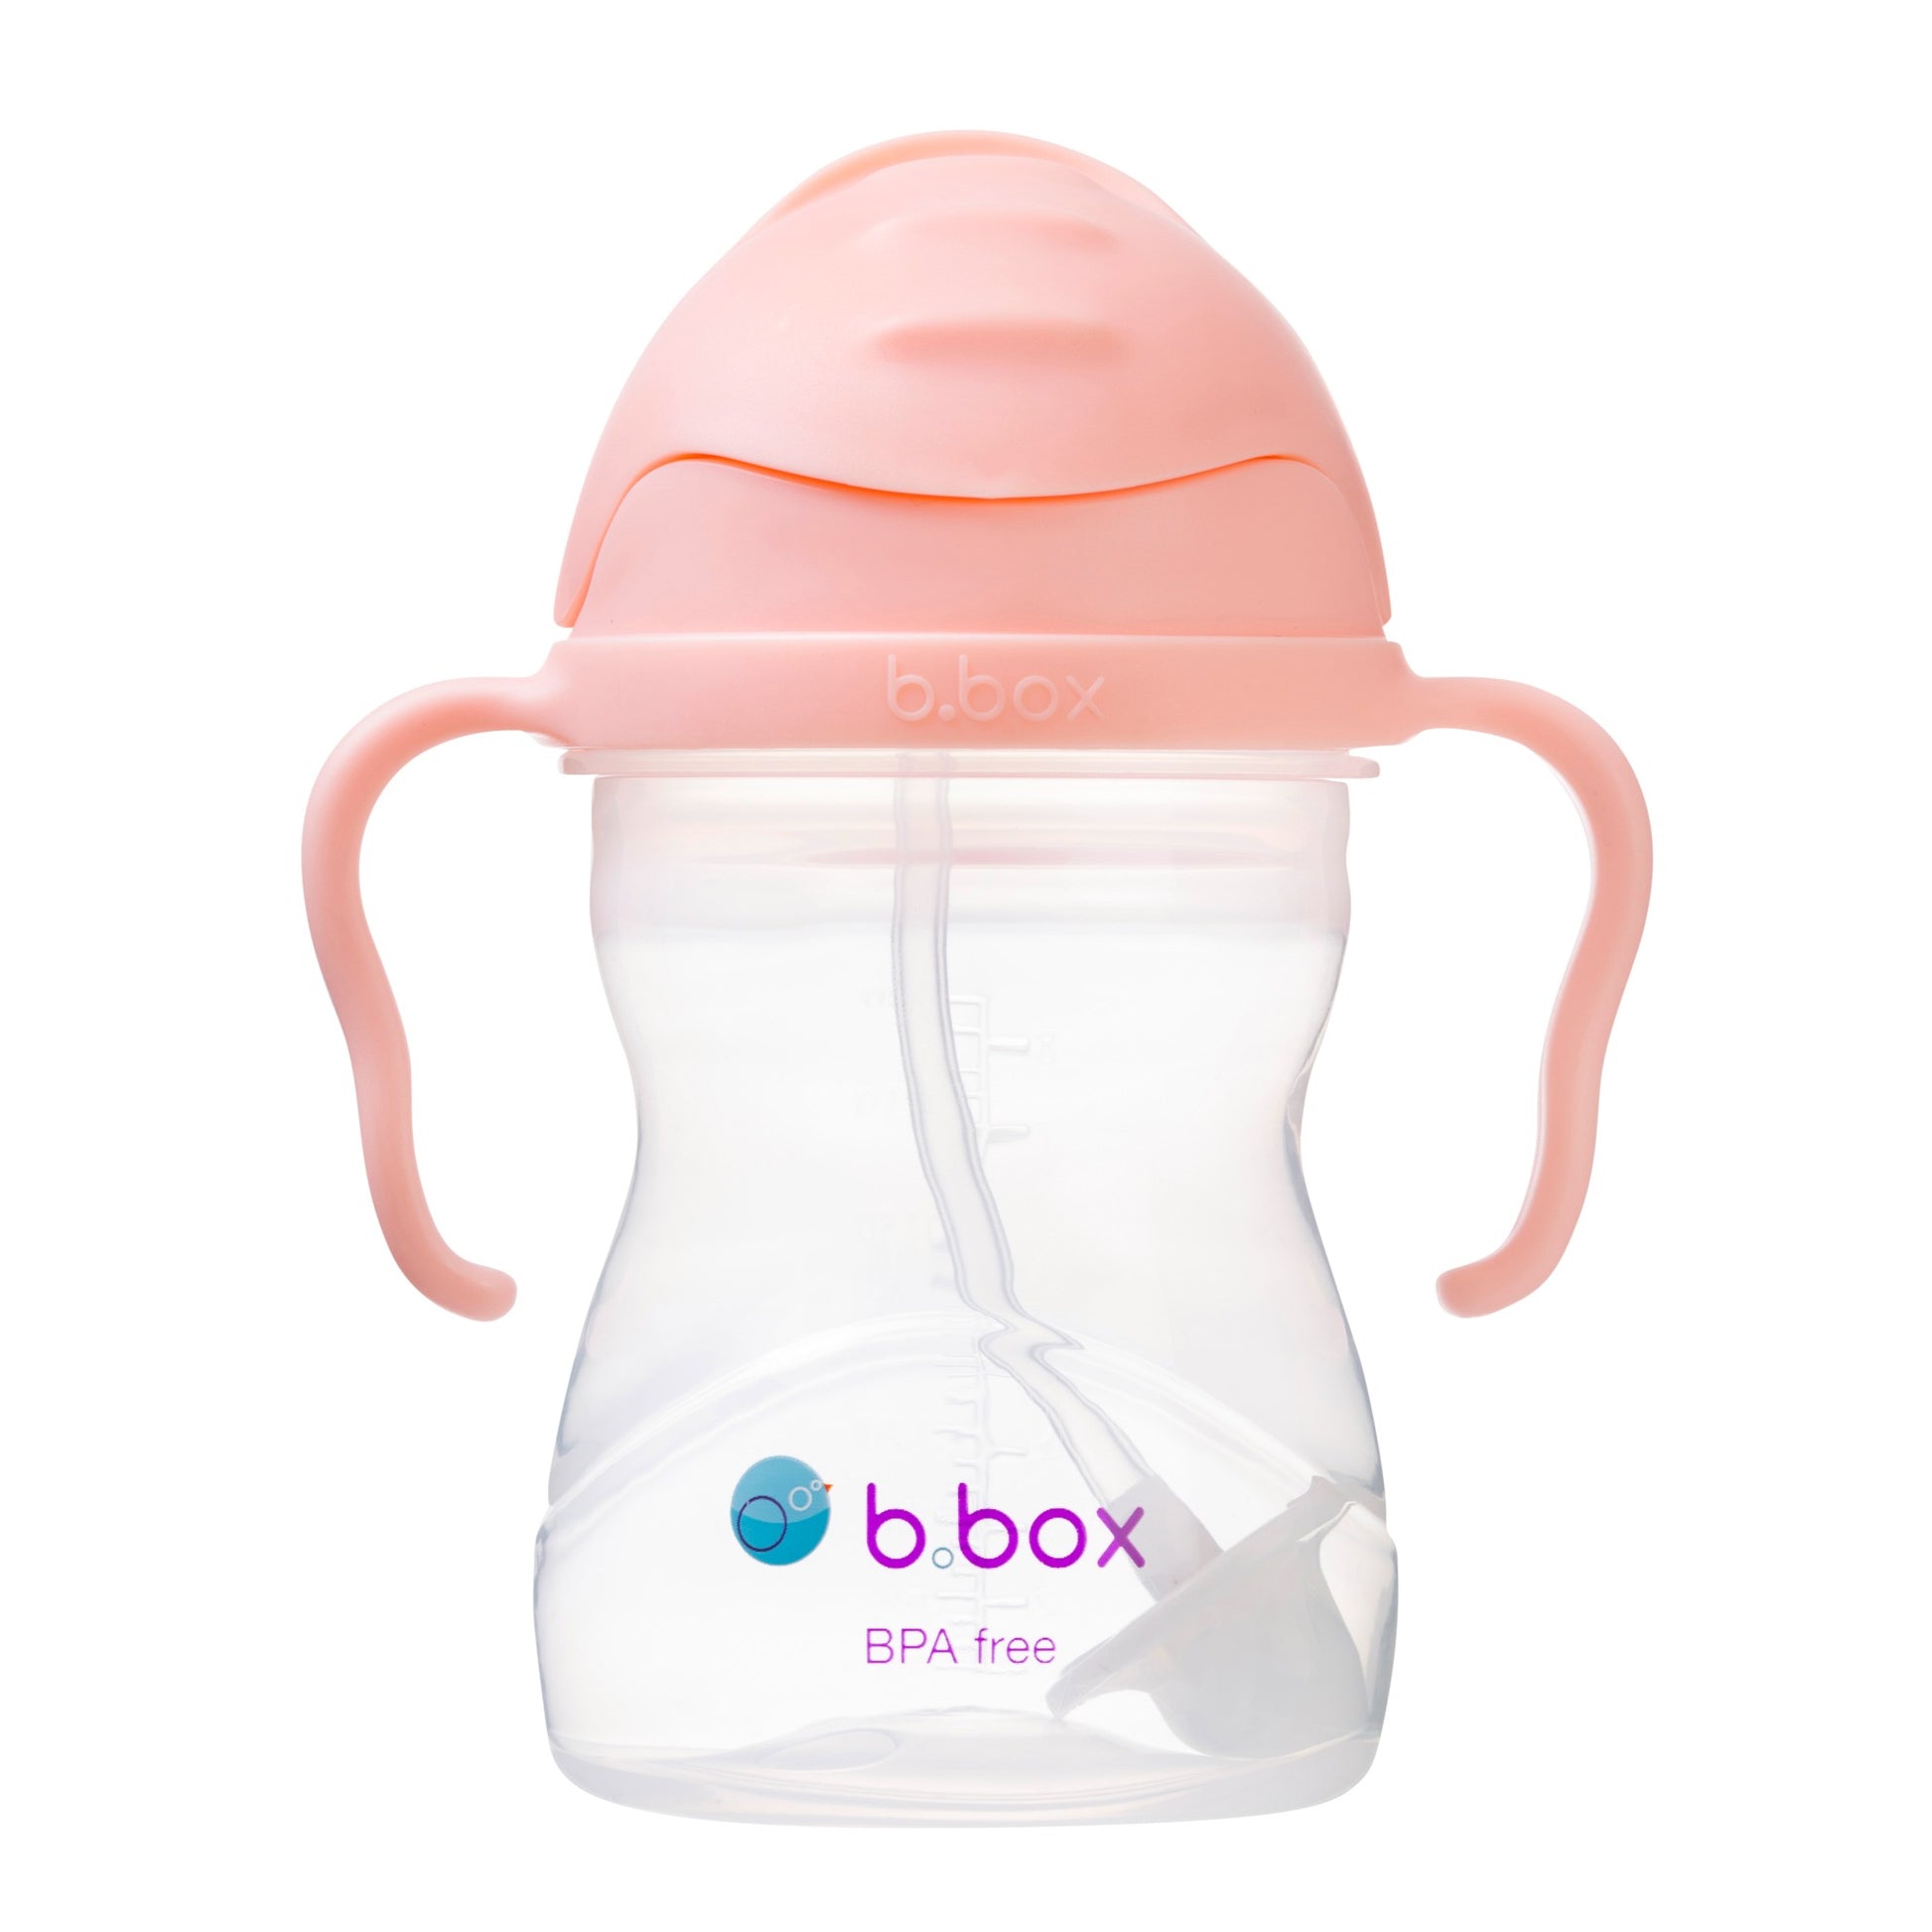 b.box Sippy Cup in Tutti Frutti available at Bear & Moo